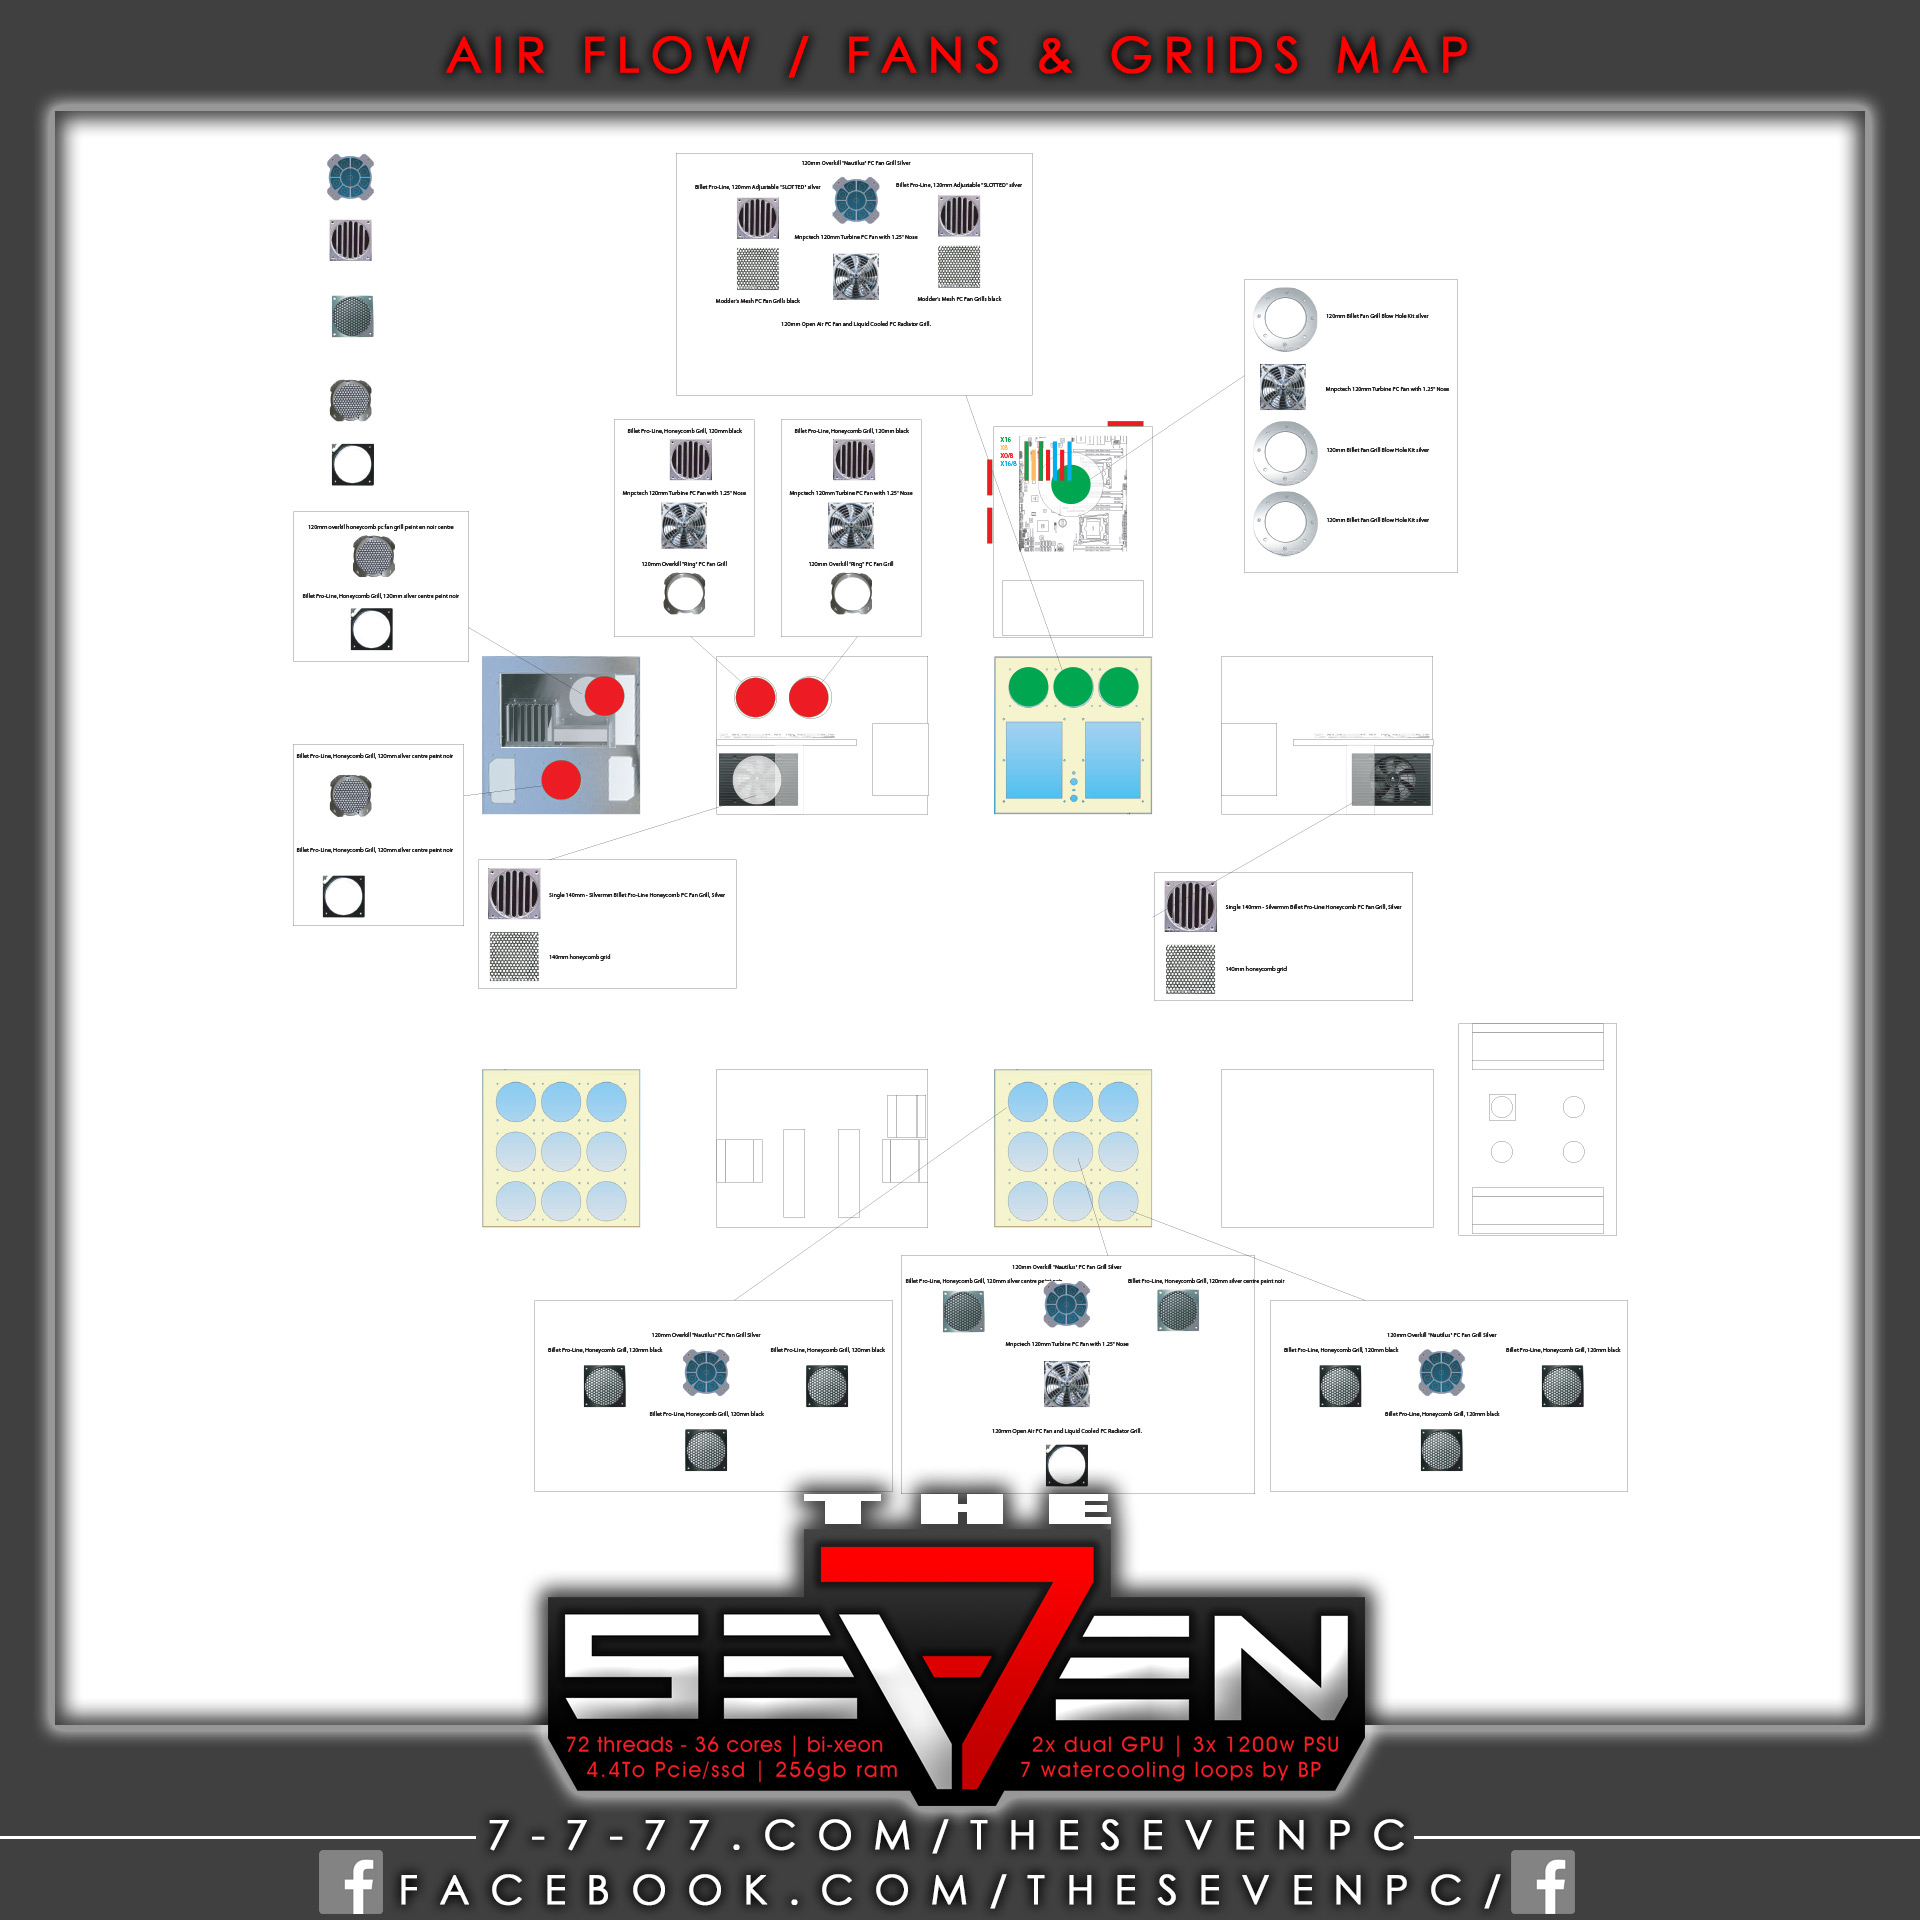 http://7-7-77.com/thesevenpc/pic/the-seven-pc-watercooling-map-10.jpg